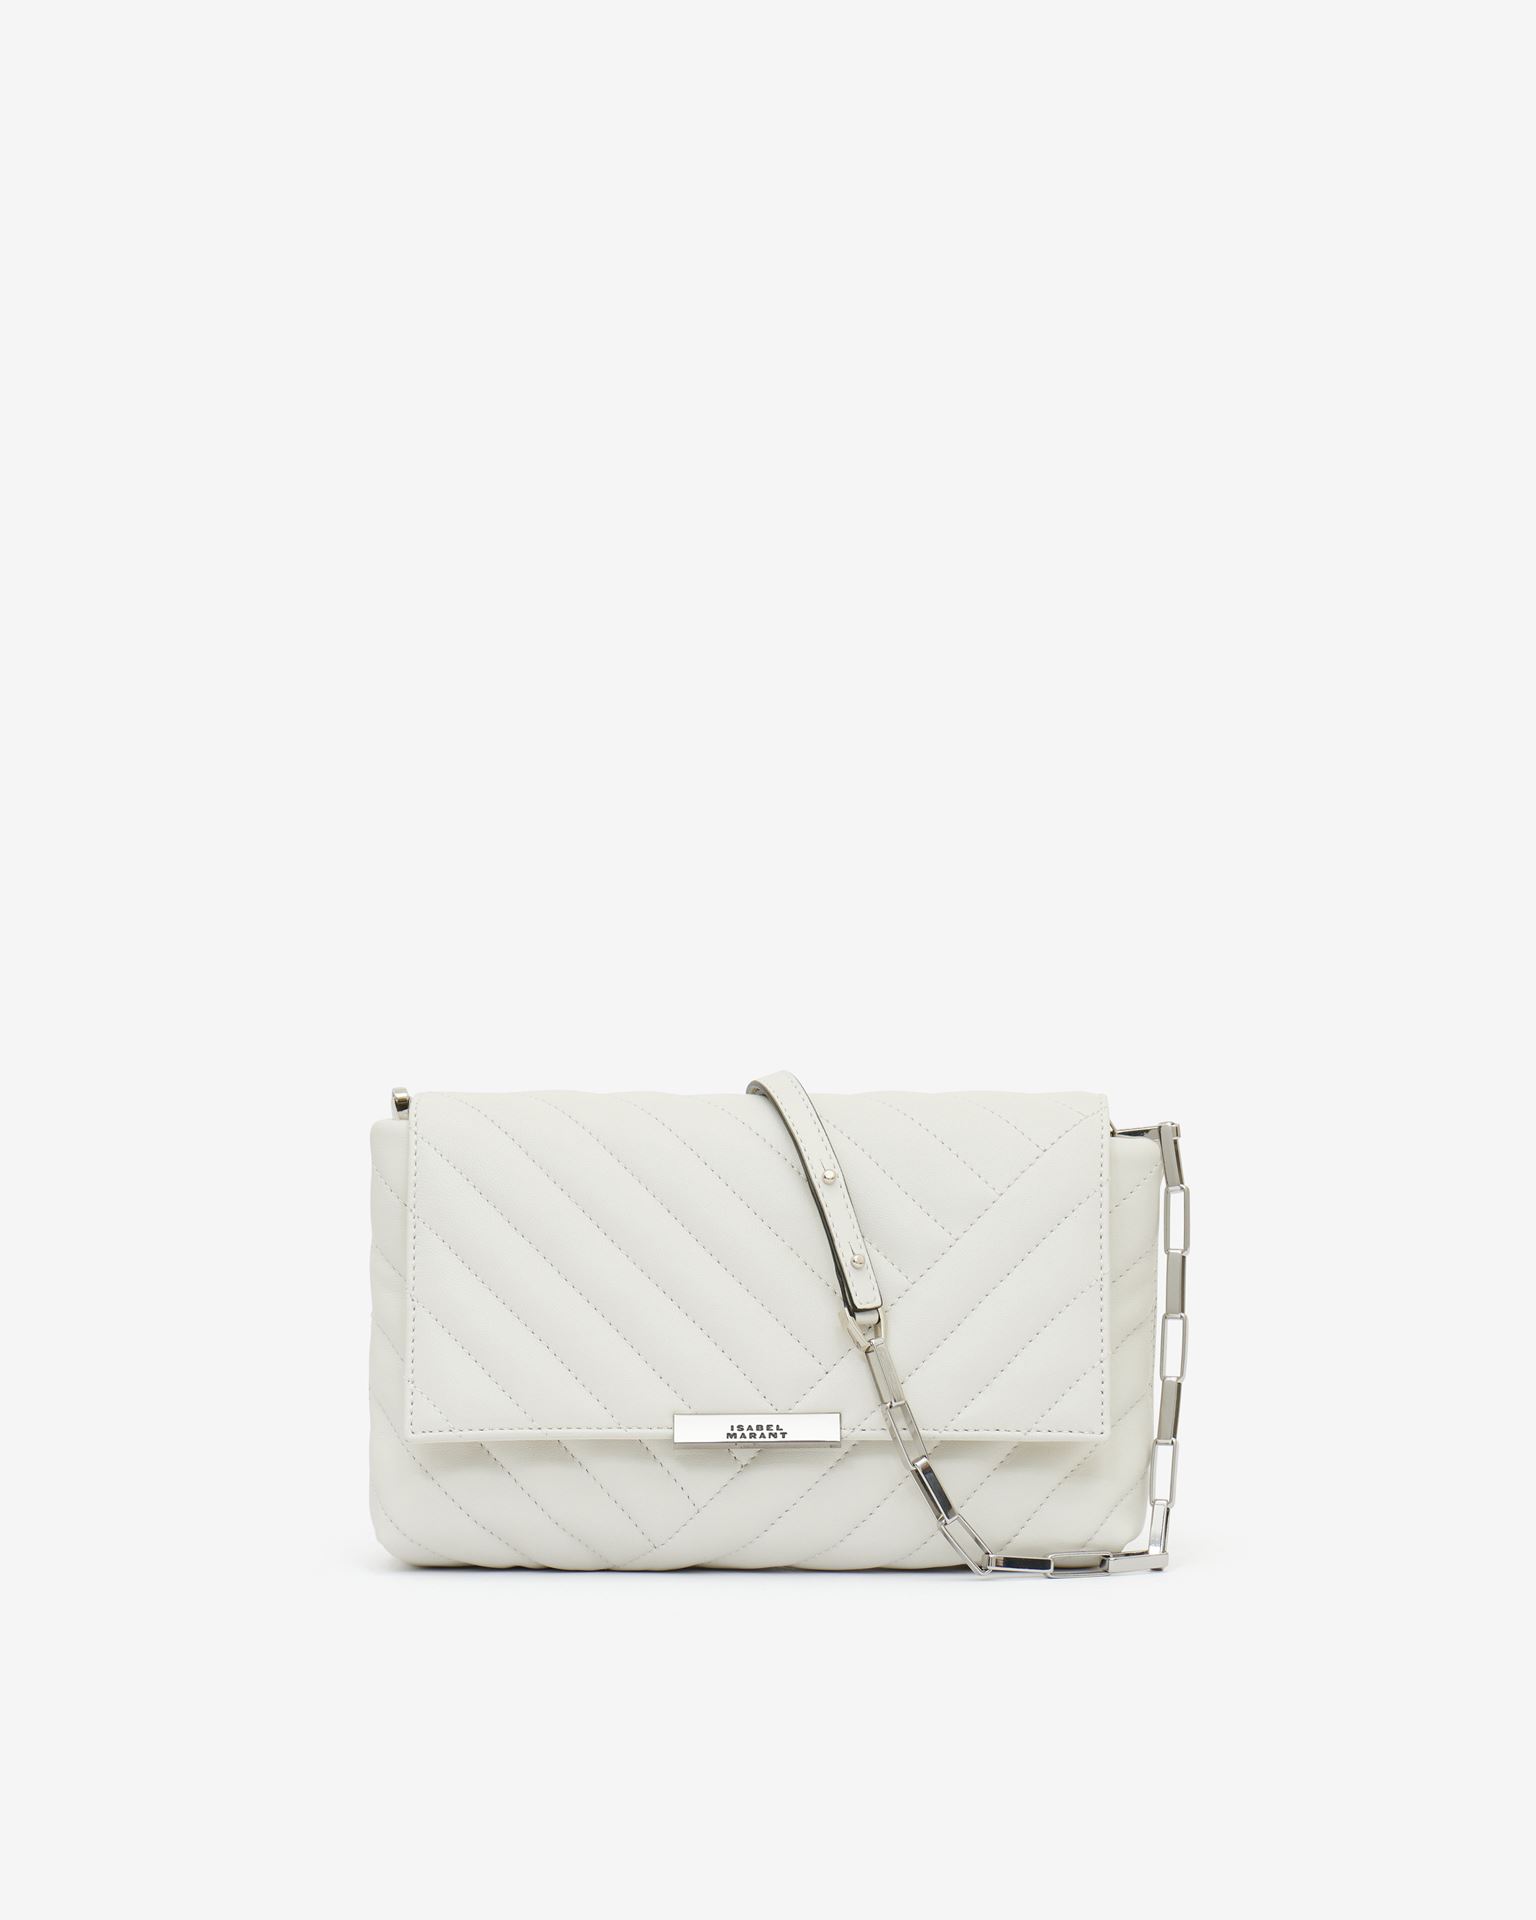 Isabel Marant, Merine Quilted Leather Bag - Women - White